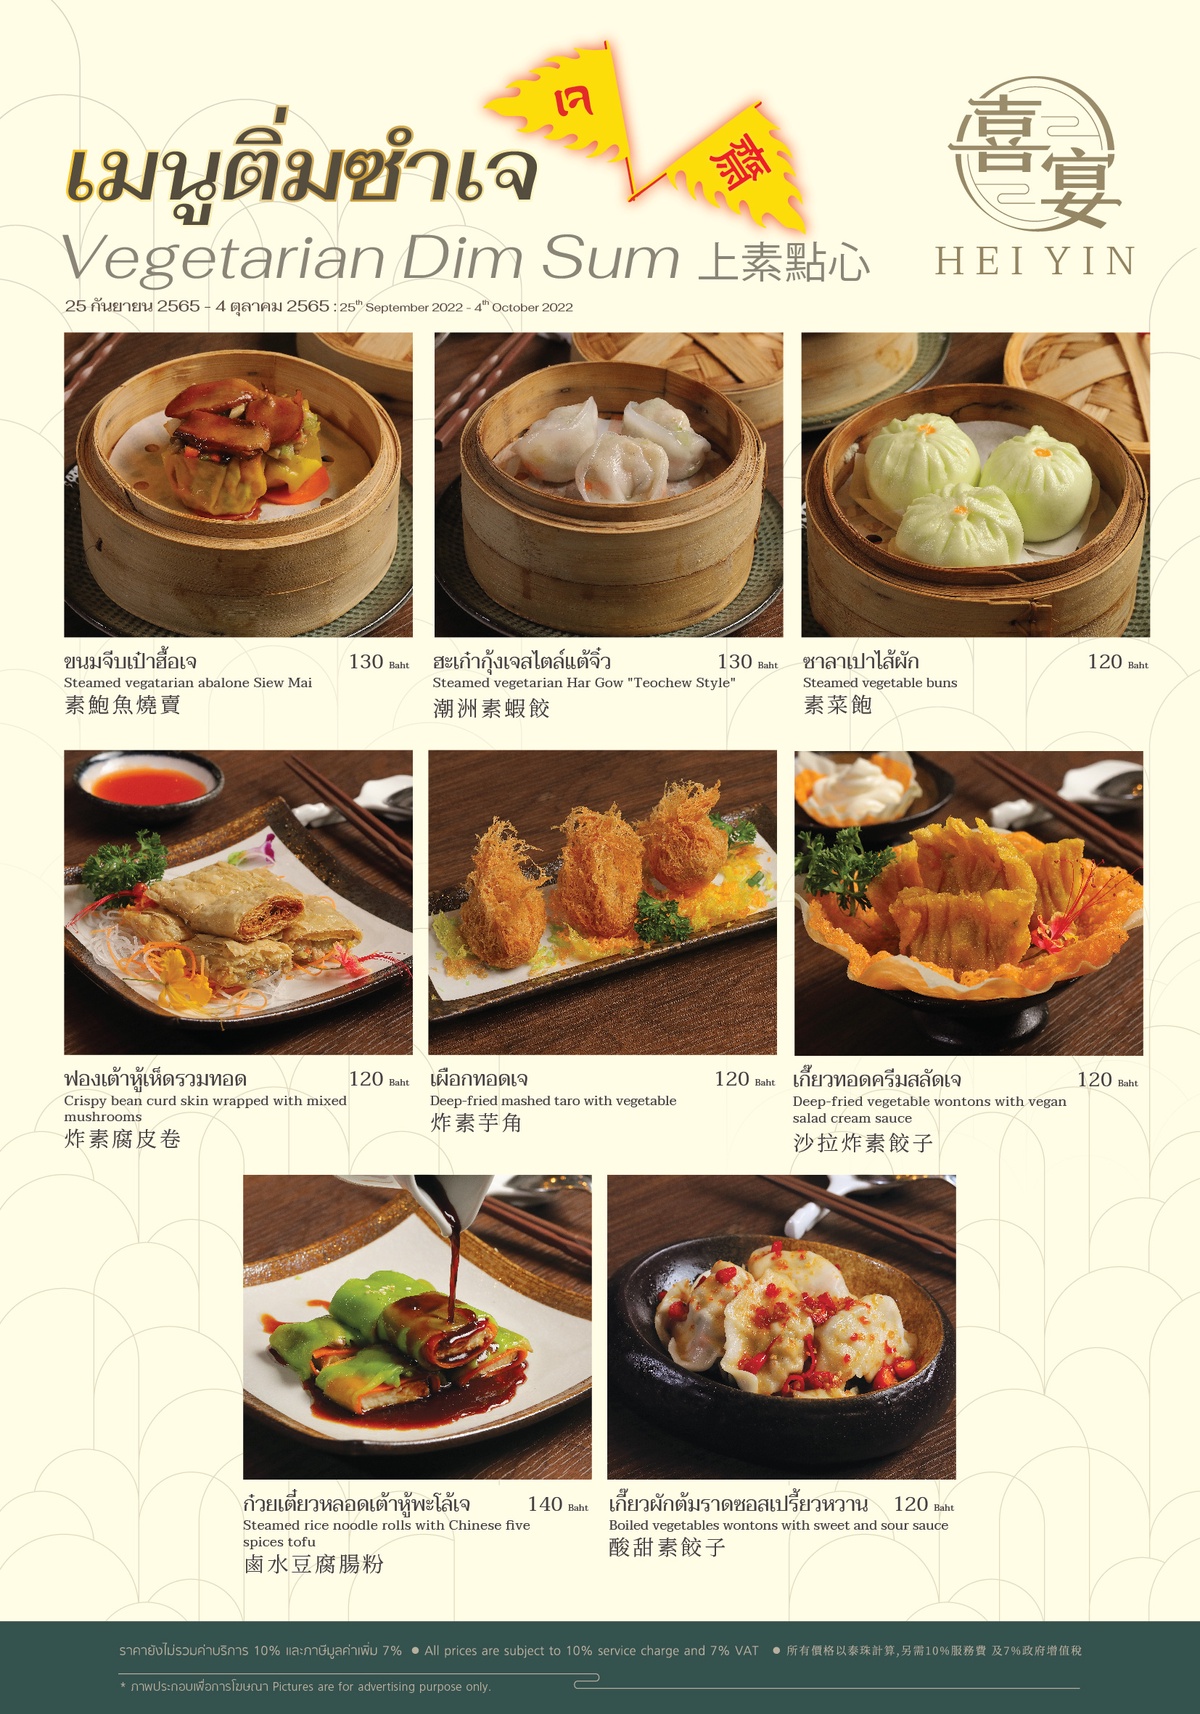 HEI YIN welcomes Vegetarian Food Festival with healthy Hong Kong style vegetarian dishes from 25 September - 4 October 2022